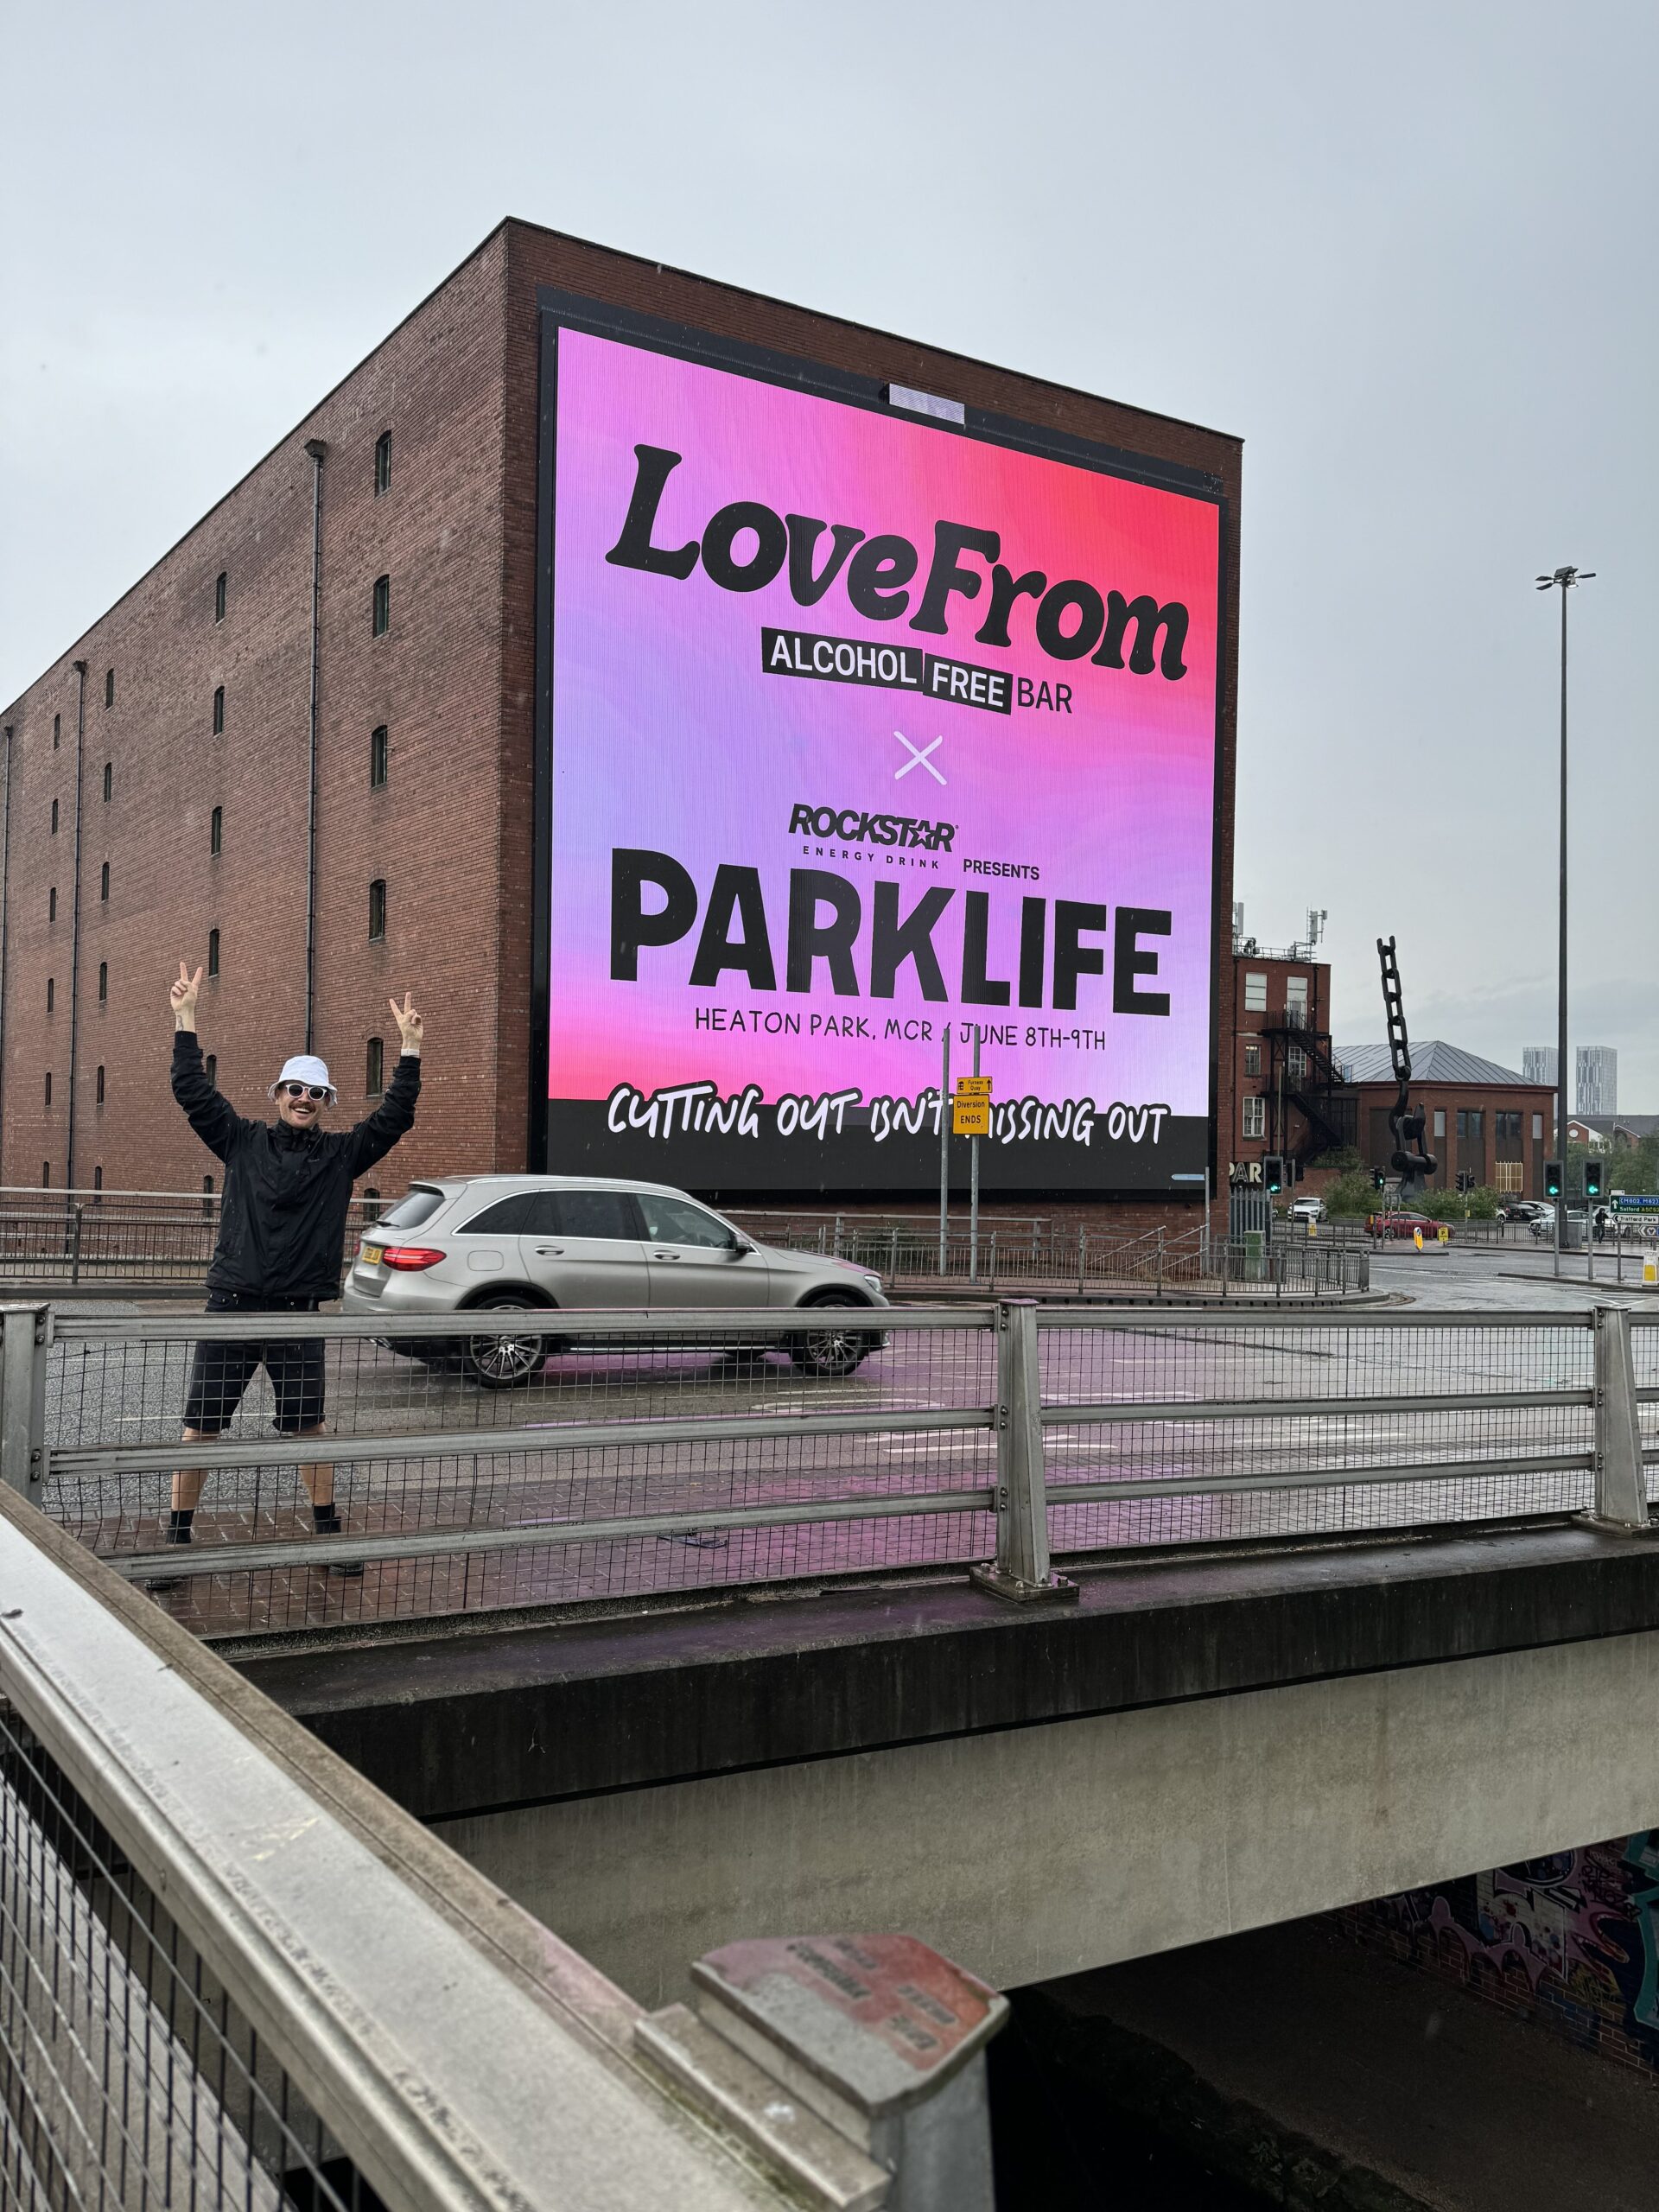 Karl Considine, founder of Love From, on announcing his alcohol-free bar will be at Parklife festival